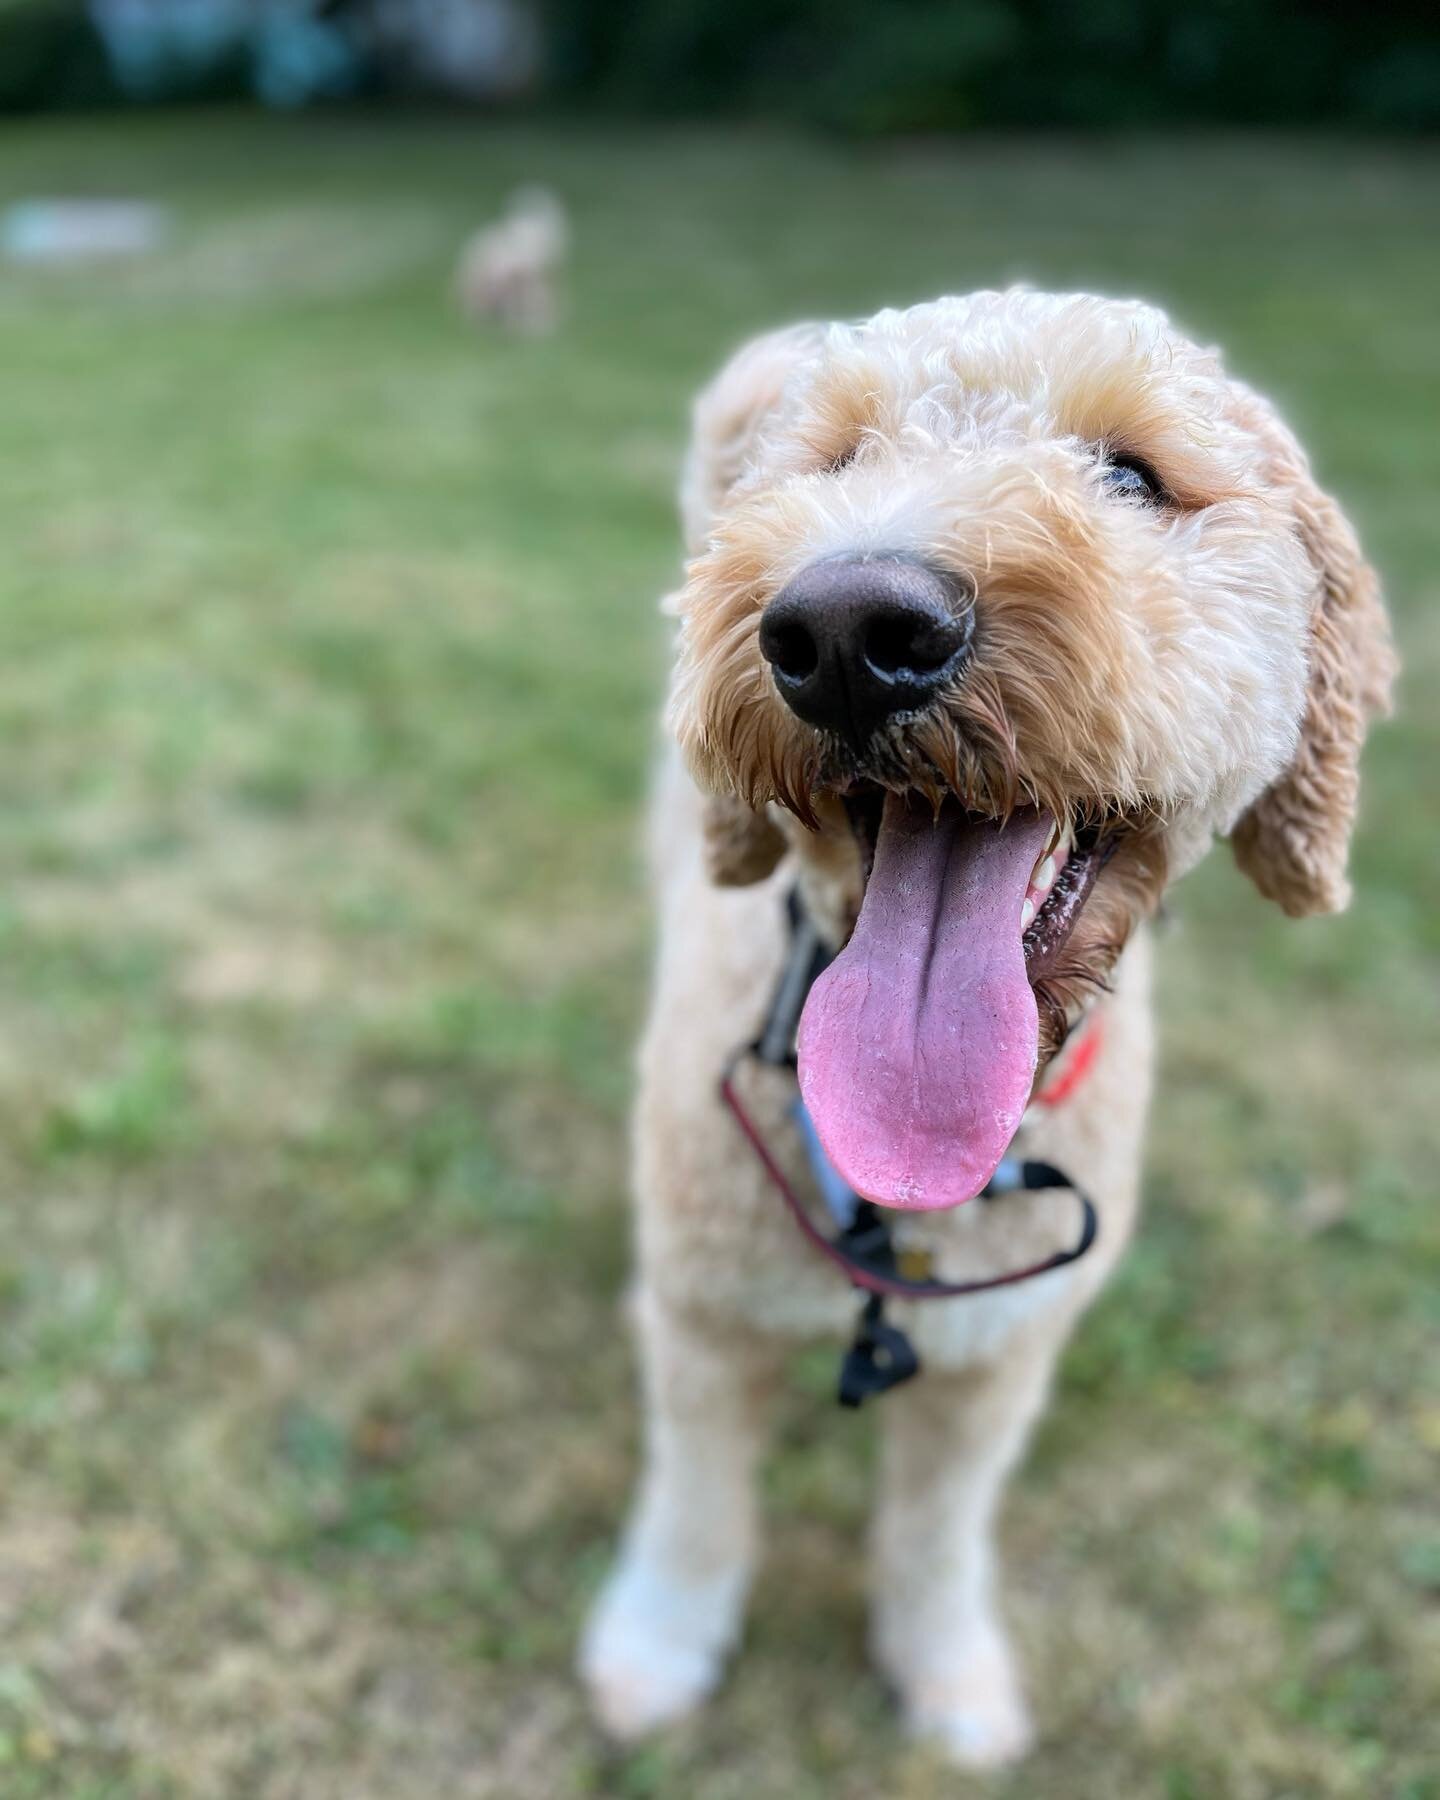 Sun&rsquo;s out, tongues out ☀️😝 Joey is always happy when he&rsquo;s out with his #friends 🐶🐾
#thepack #dogwalking #dogs #sunsouttonguesout #happydog #goldendoodle #aotp #summervibes